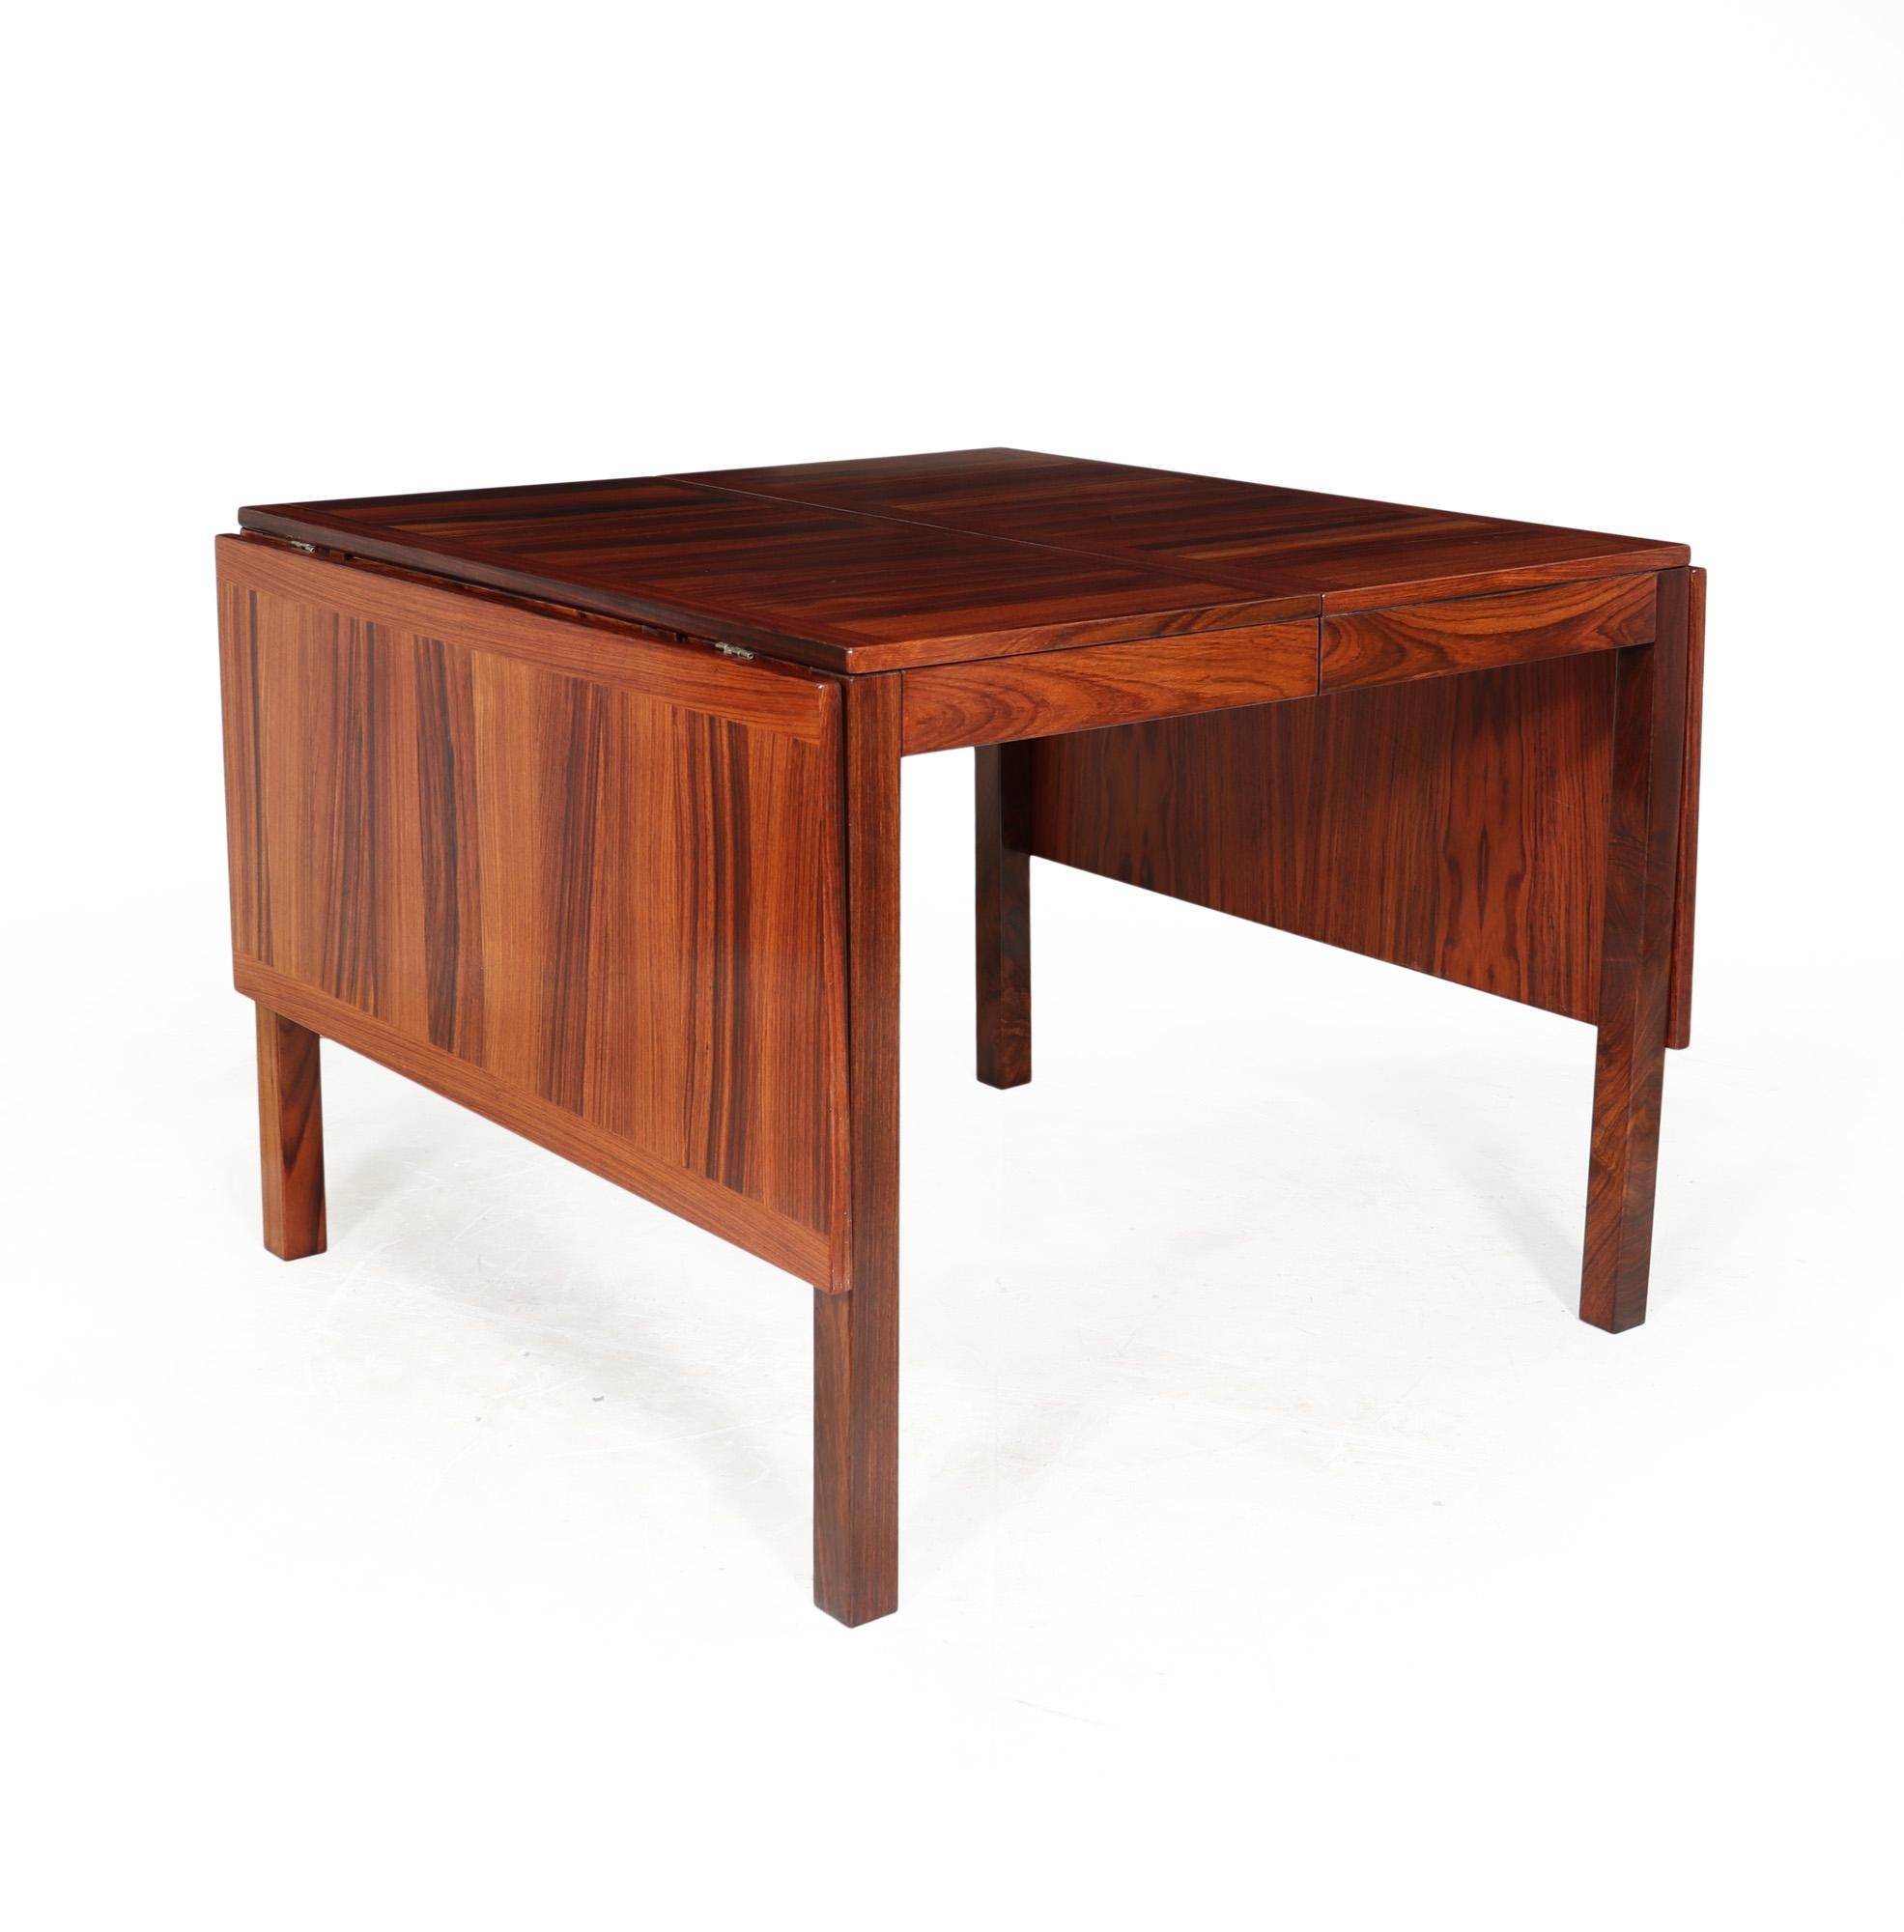 MID CENTURY DINING TABLE
A mid century drop leaf dining table deigned by Vejle Stole in Denmark in the 1970’s produced in Santos rosewood this is a rare example of this table, can seat up to 12 people when fully extended, the runners all run